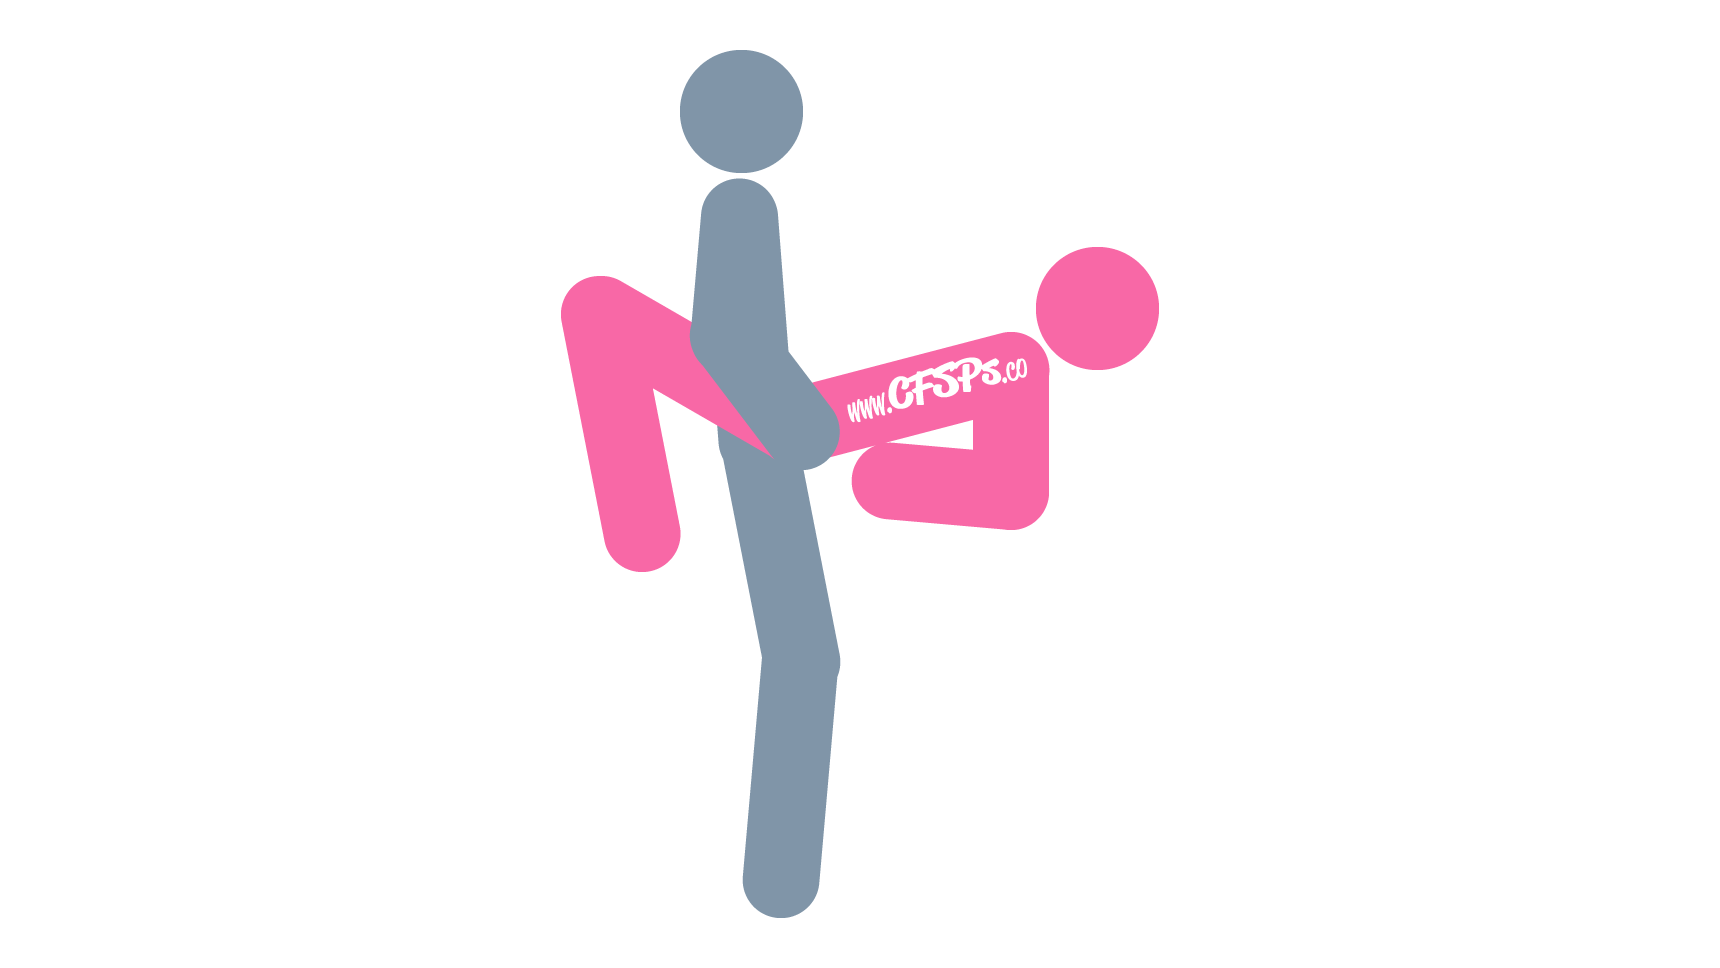 This stick figure image depicts a man and woman having sex in the Swing Fling sex position. The woman is positioned with her elbows on a swing while the man is standing between her legs and holding her body under her butt.